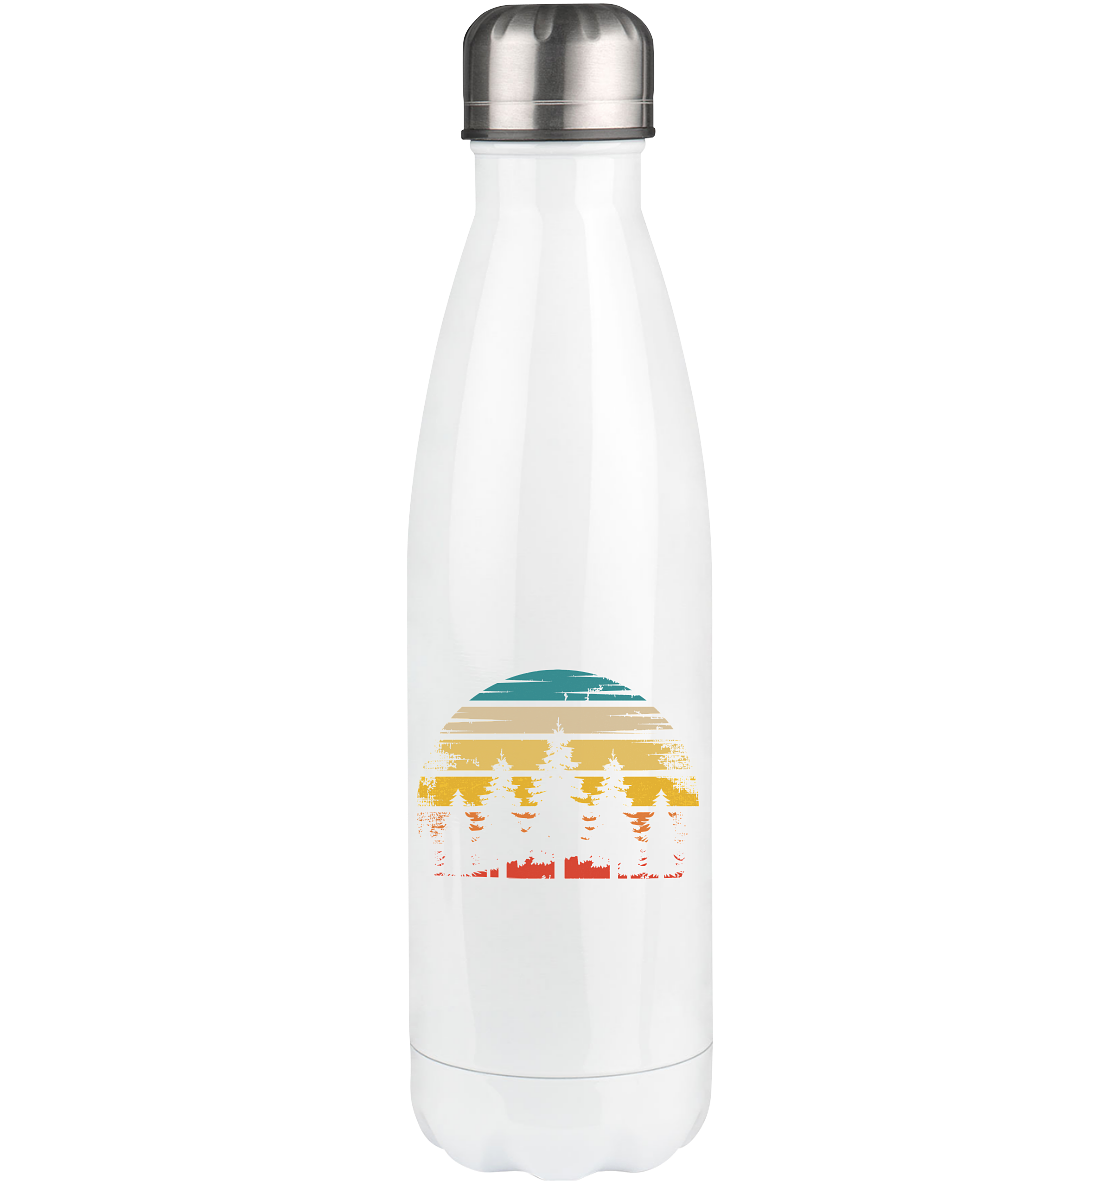 Retro Sun and Trees - Edelstahl Thermosflasche camping UONP 500ml